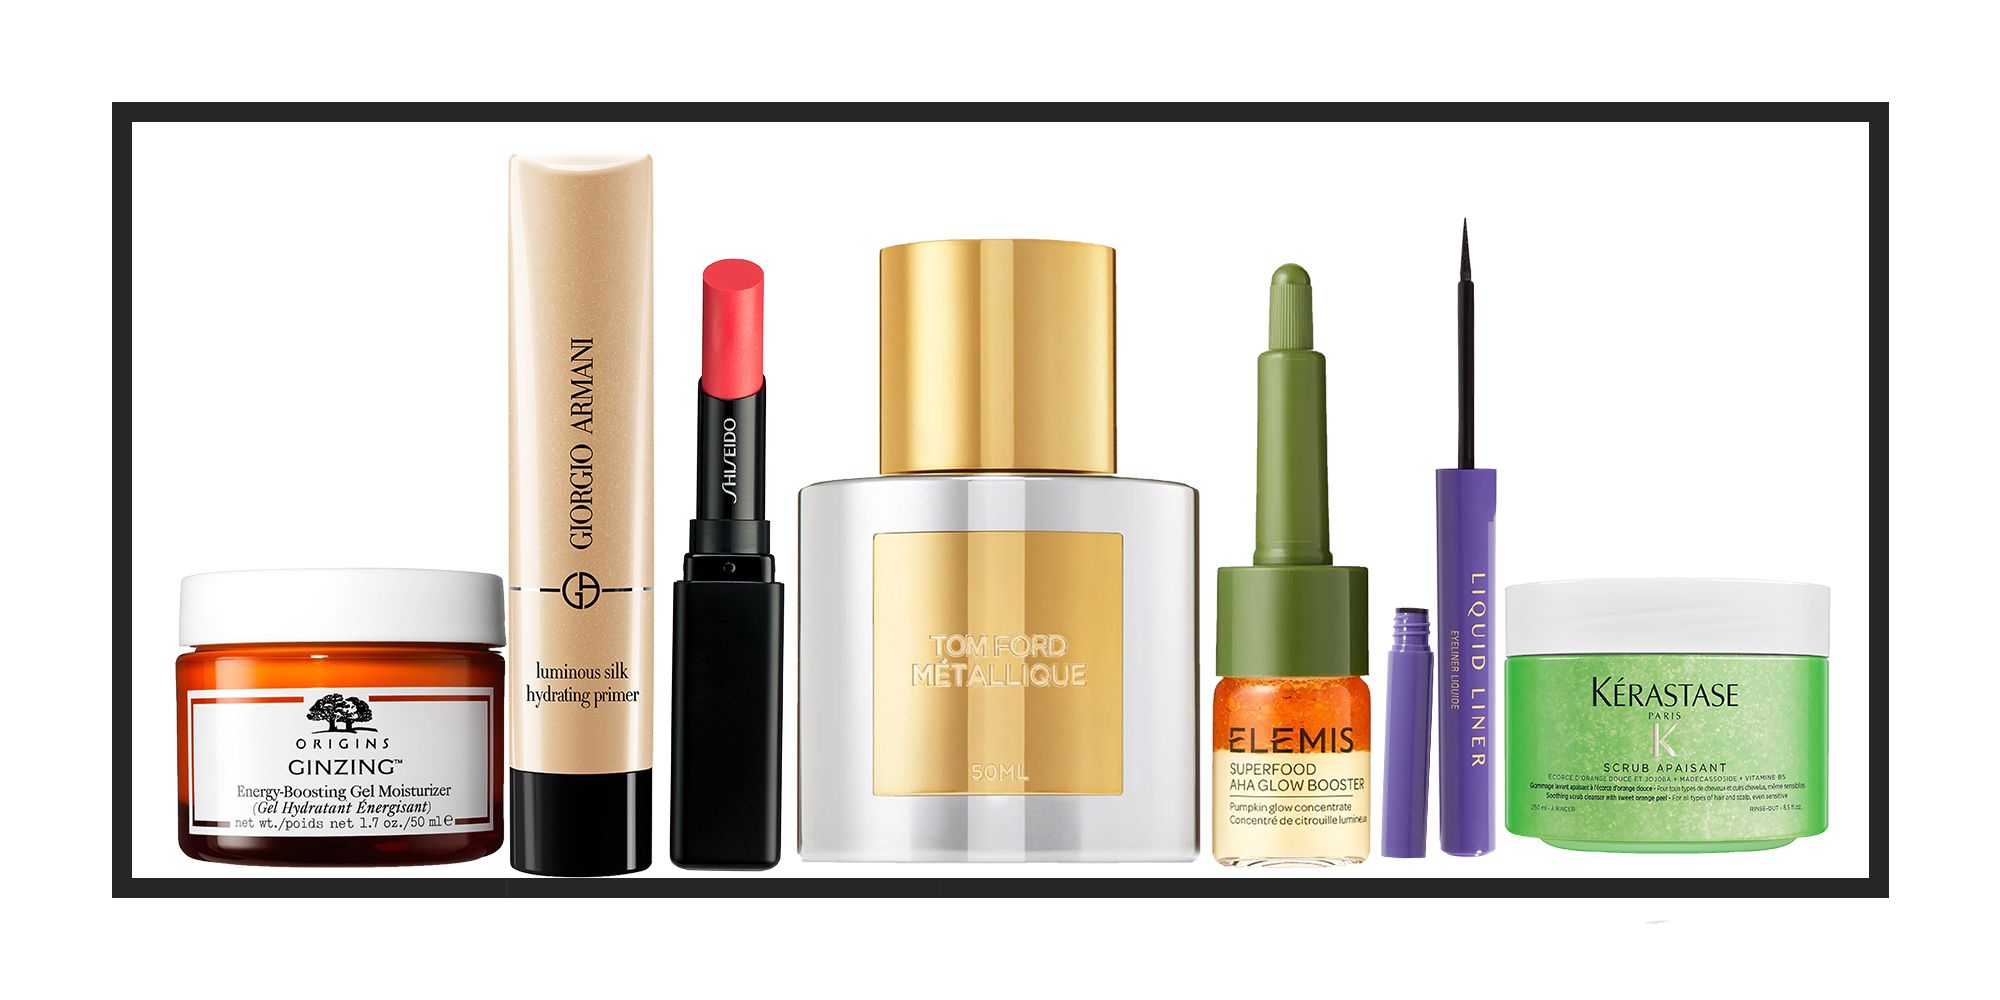 best armani beauty products